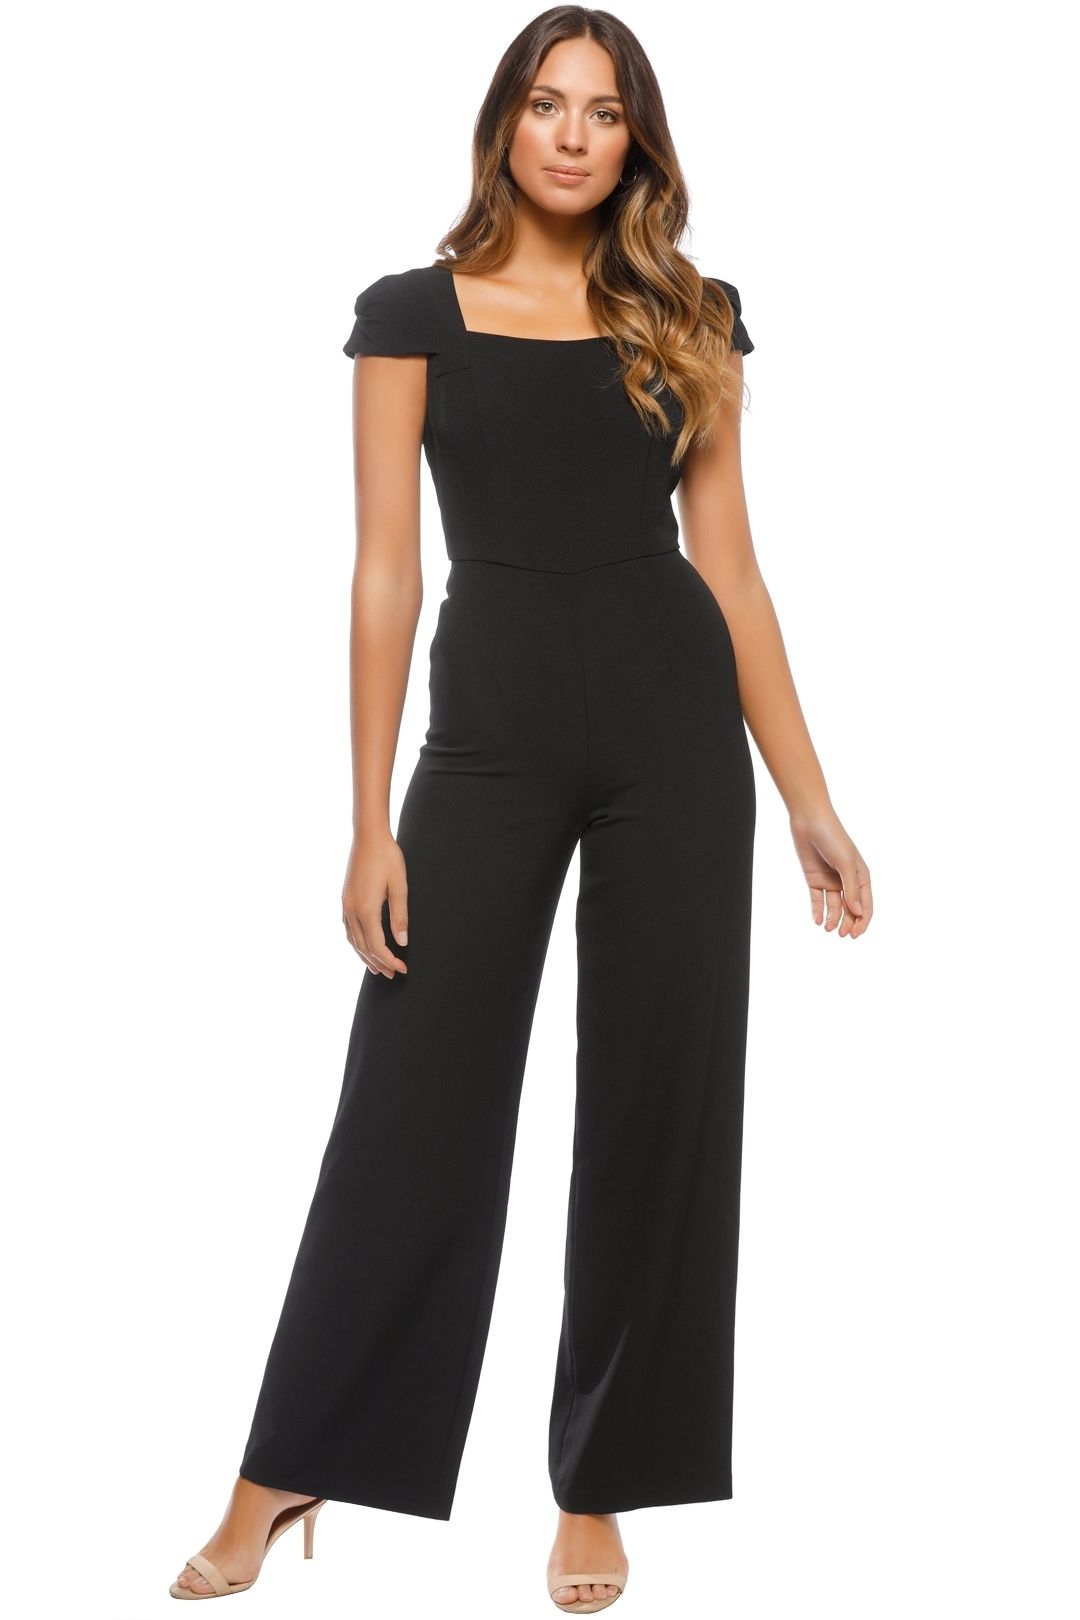 Adrianna Papell - Stretch Crepe Jumpsuit - Black - Front